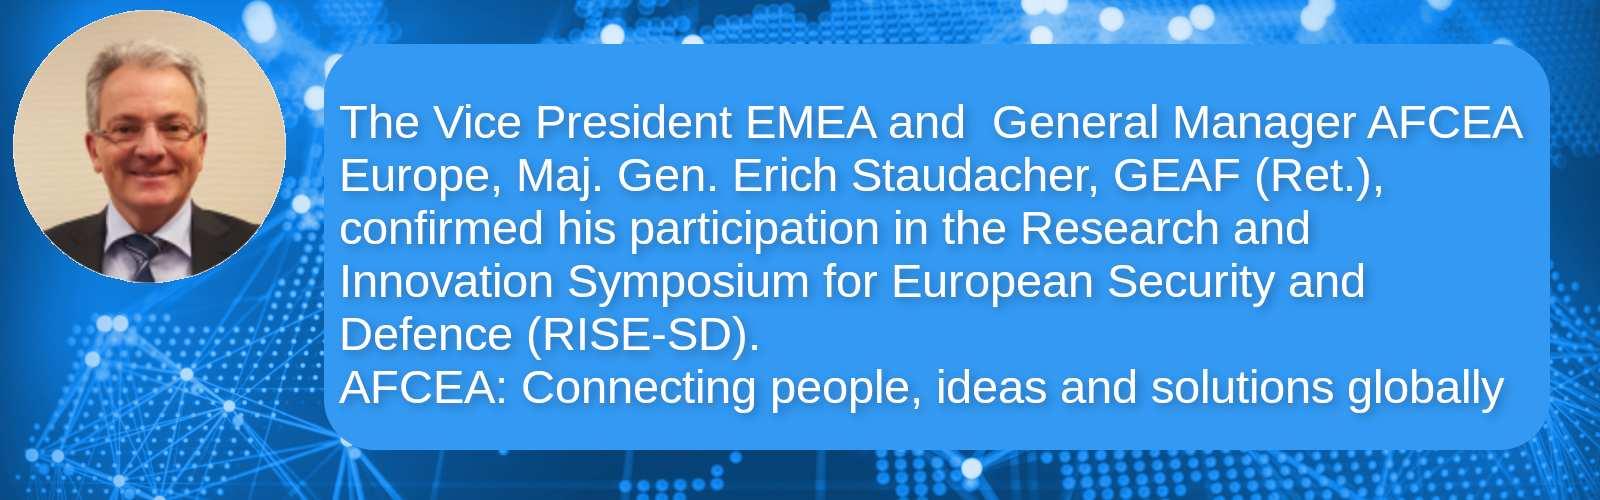 The Vice President EMEA and  General Manager AFCEA Europe, Maj. Gen. Erich Staudacher, GEAF (Ret.), confirmed his participation